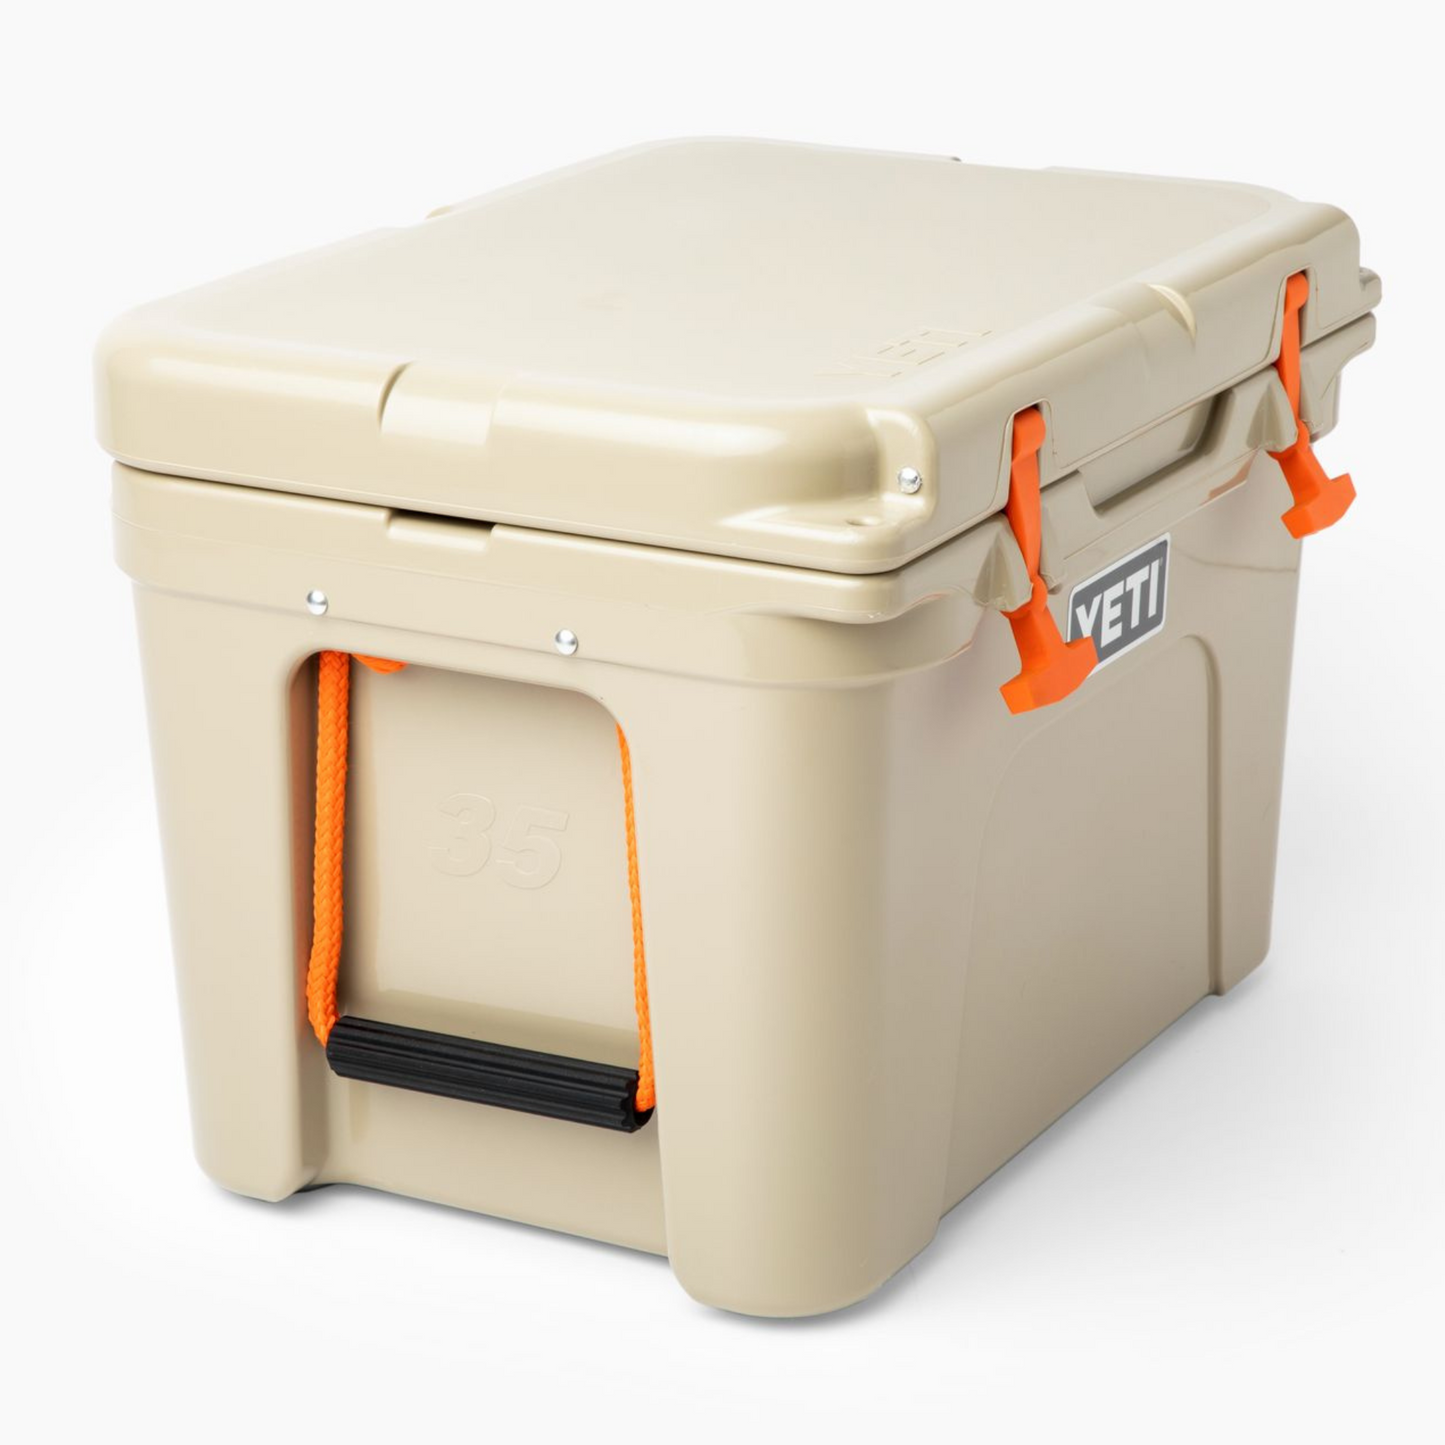 BEAST COOLER ACCESSORIES 2-Pack Burnt Orange Lid Latches Compatible w/Yeti  & RTIC, 15.75 H 12.48 L 4.06 W - Fred Meyer